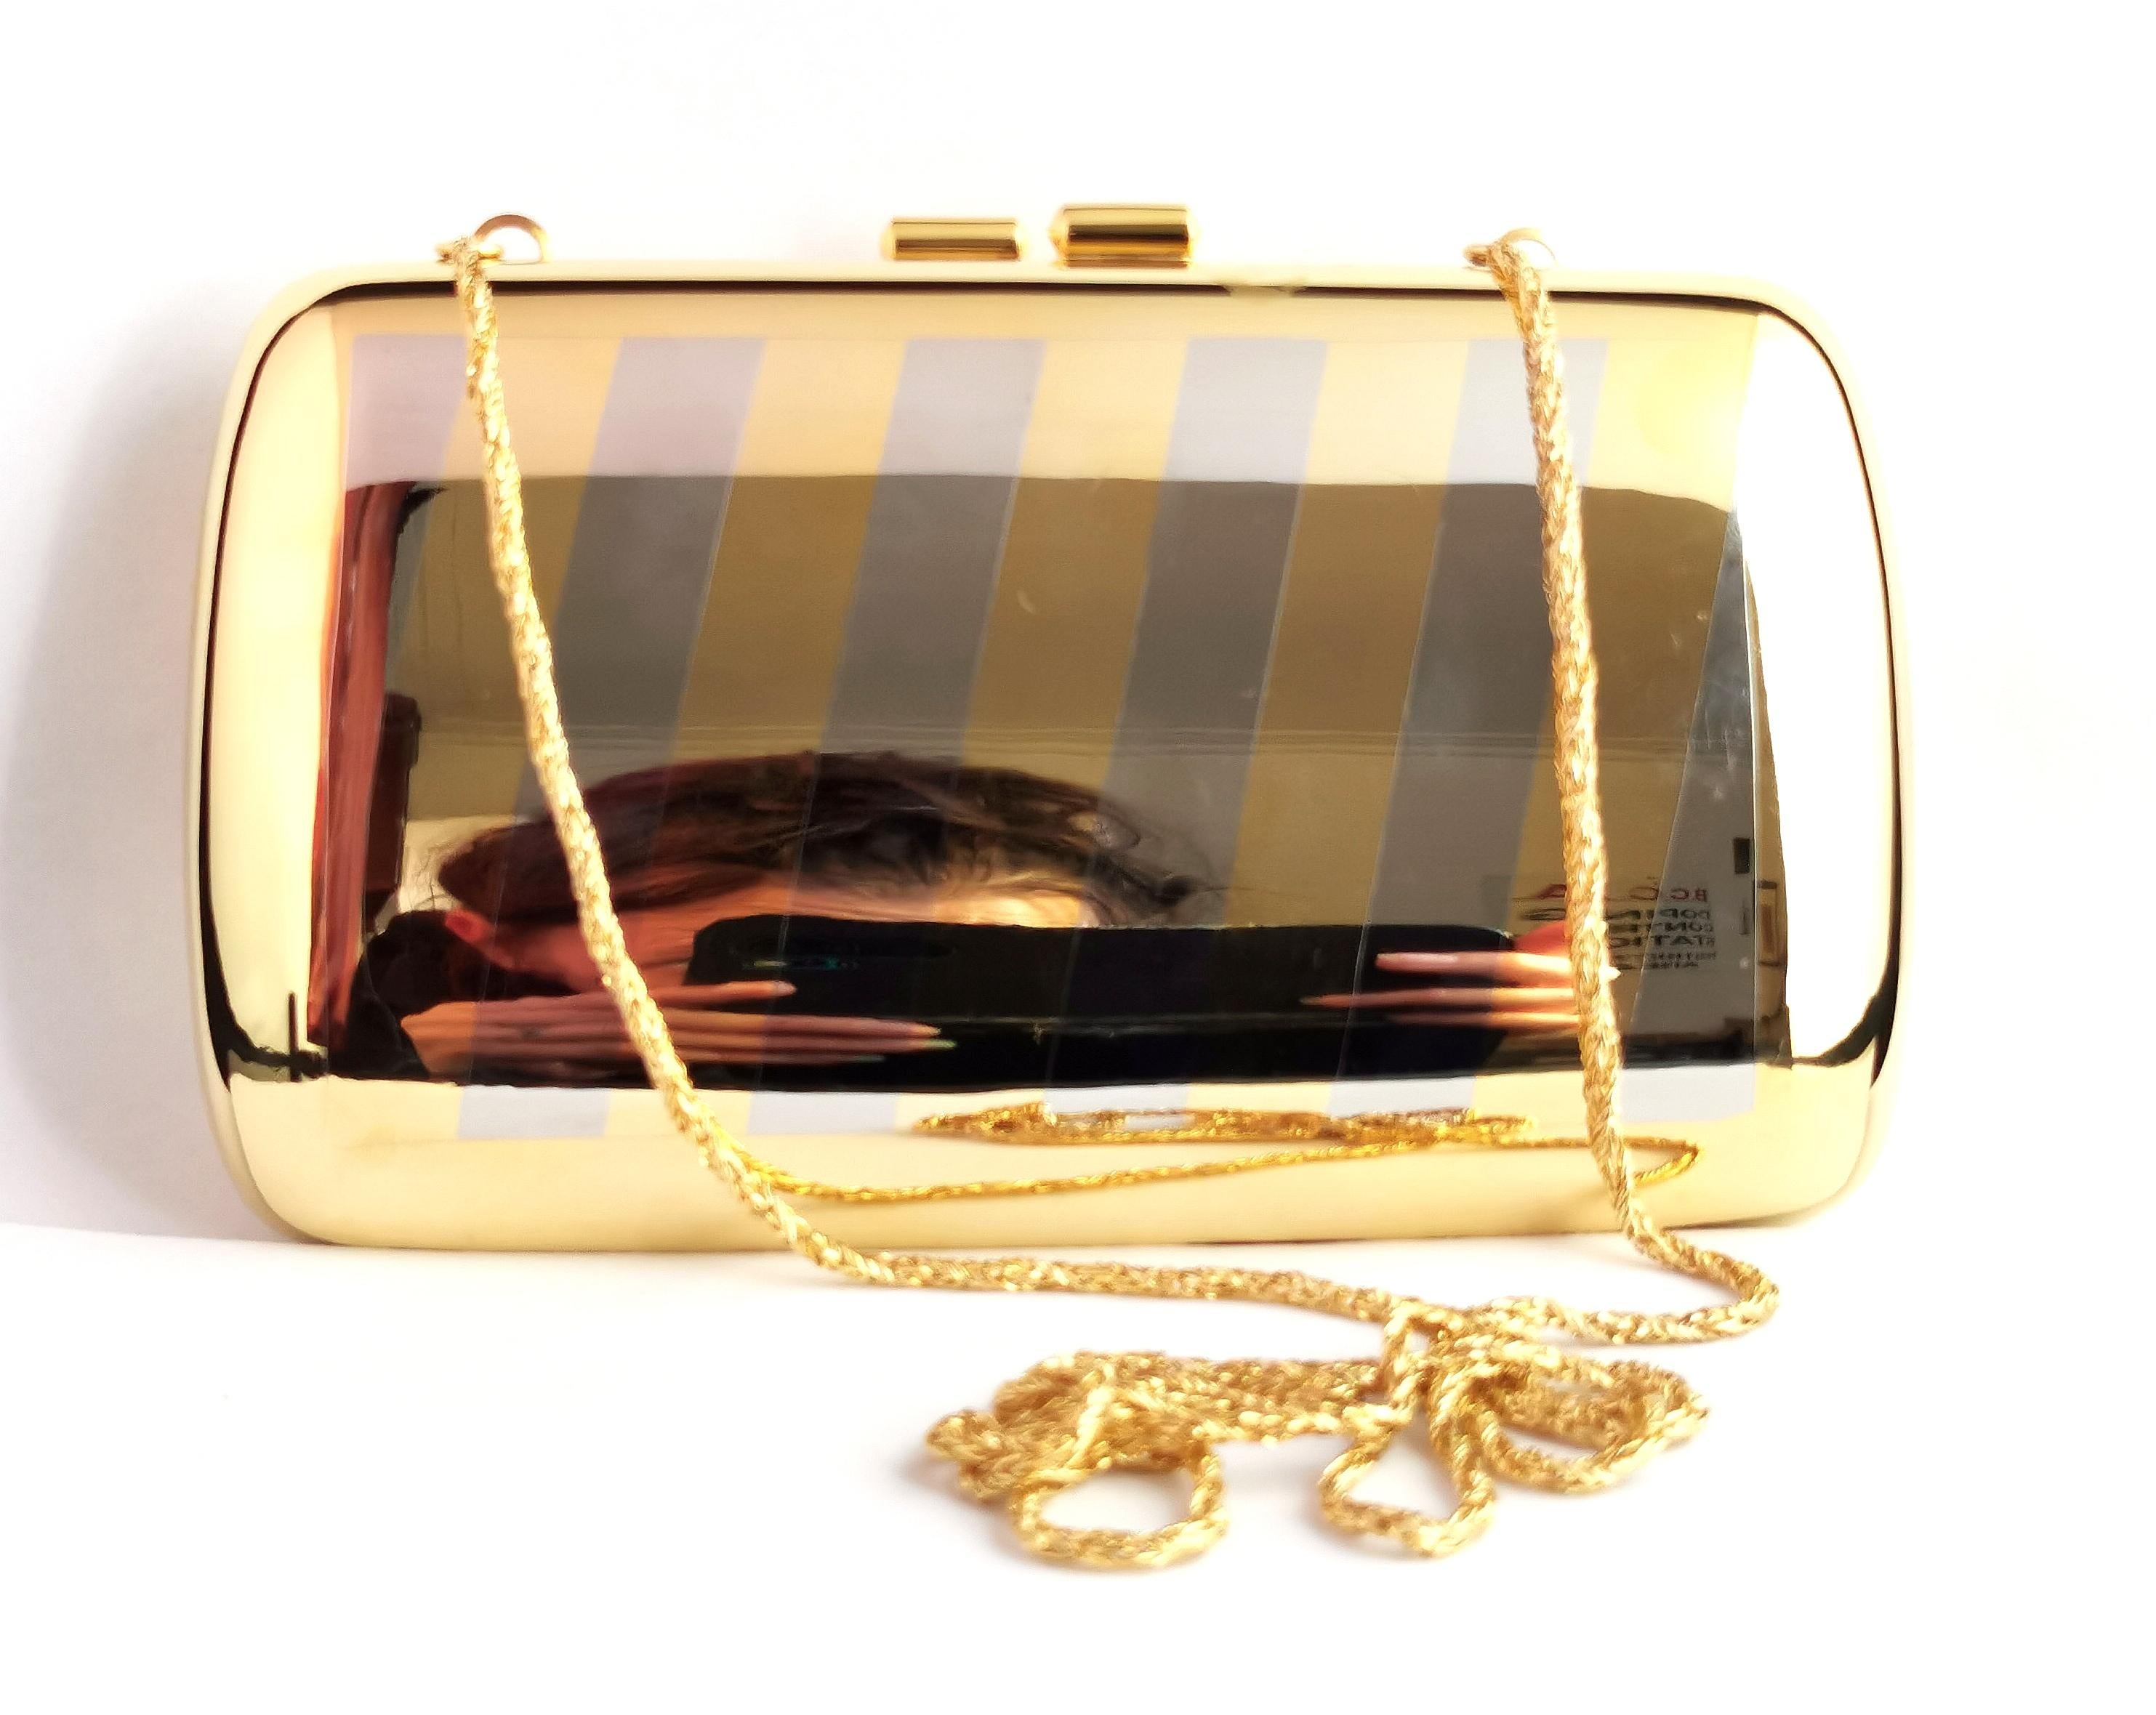 A gorgeous vintage Pierre Cardin hard case metal evening purse or handbag.

It is a rounded rectangular shape with diagonal striping of gold and silver tone metal with a long gold tone metal handle.

Inside is lined with a beige velveteen and the